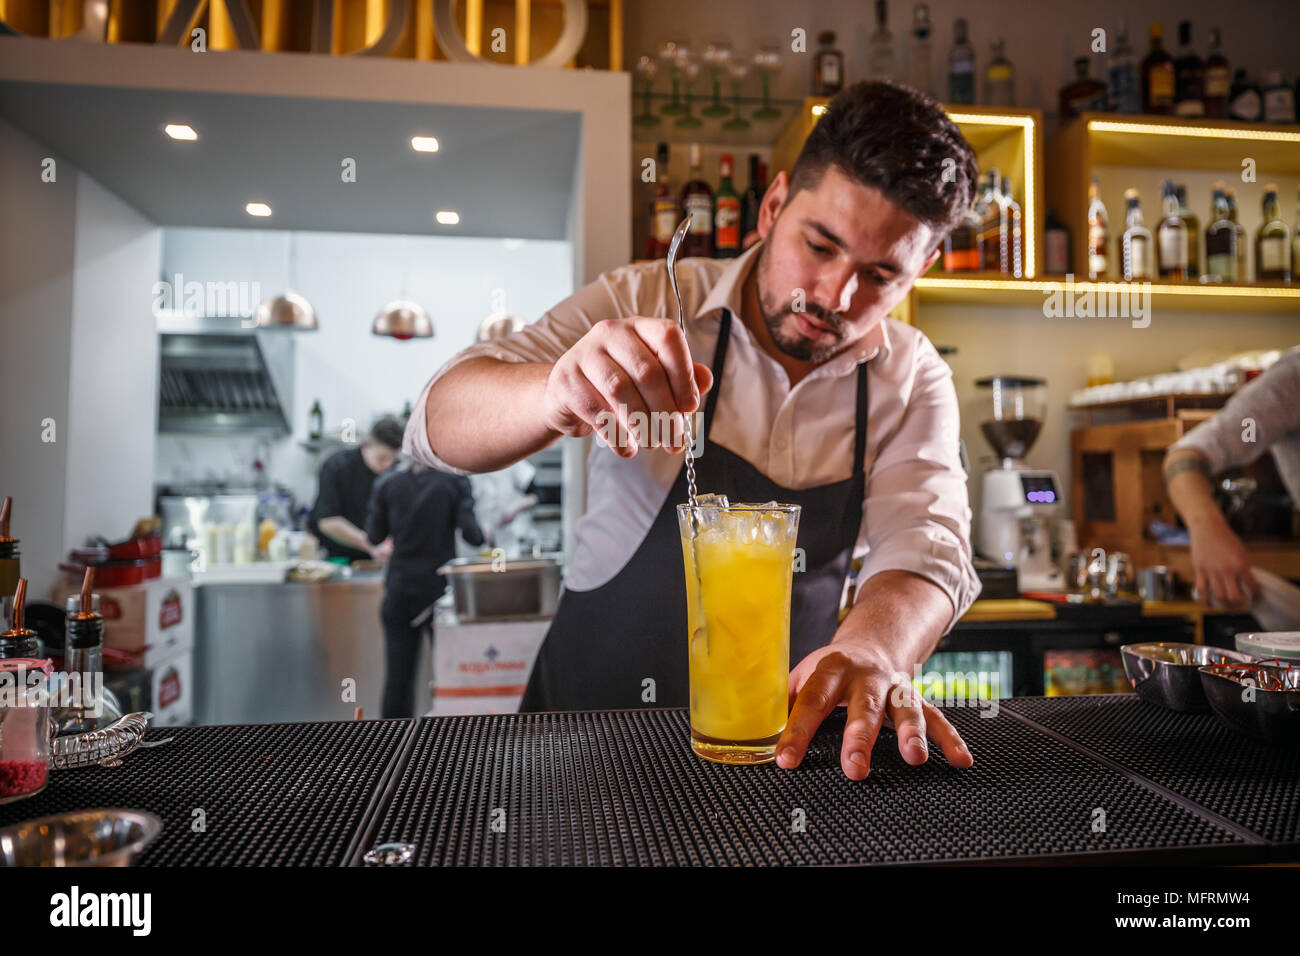 Bartender behind the bar counter stirring a non-alcoholic drink with steel swizzle spoon Stock Photo